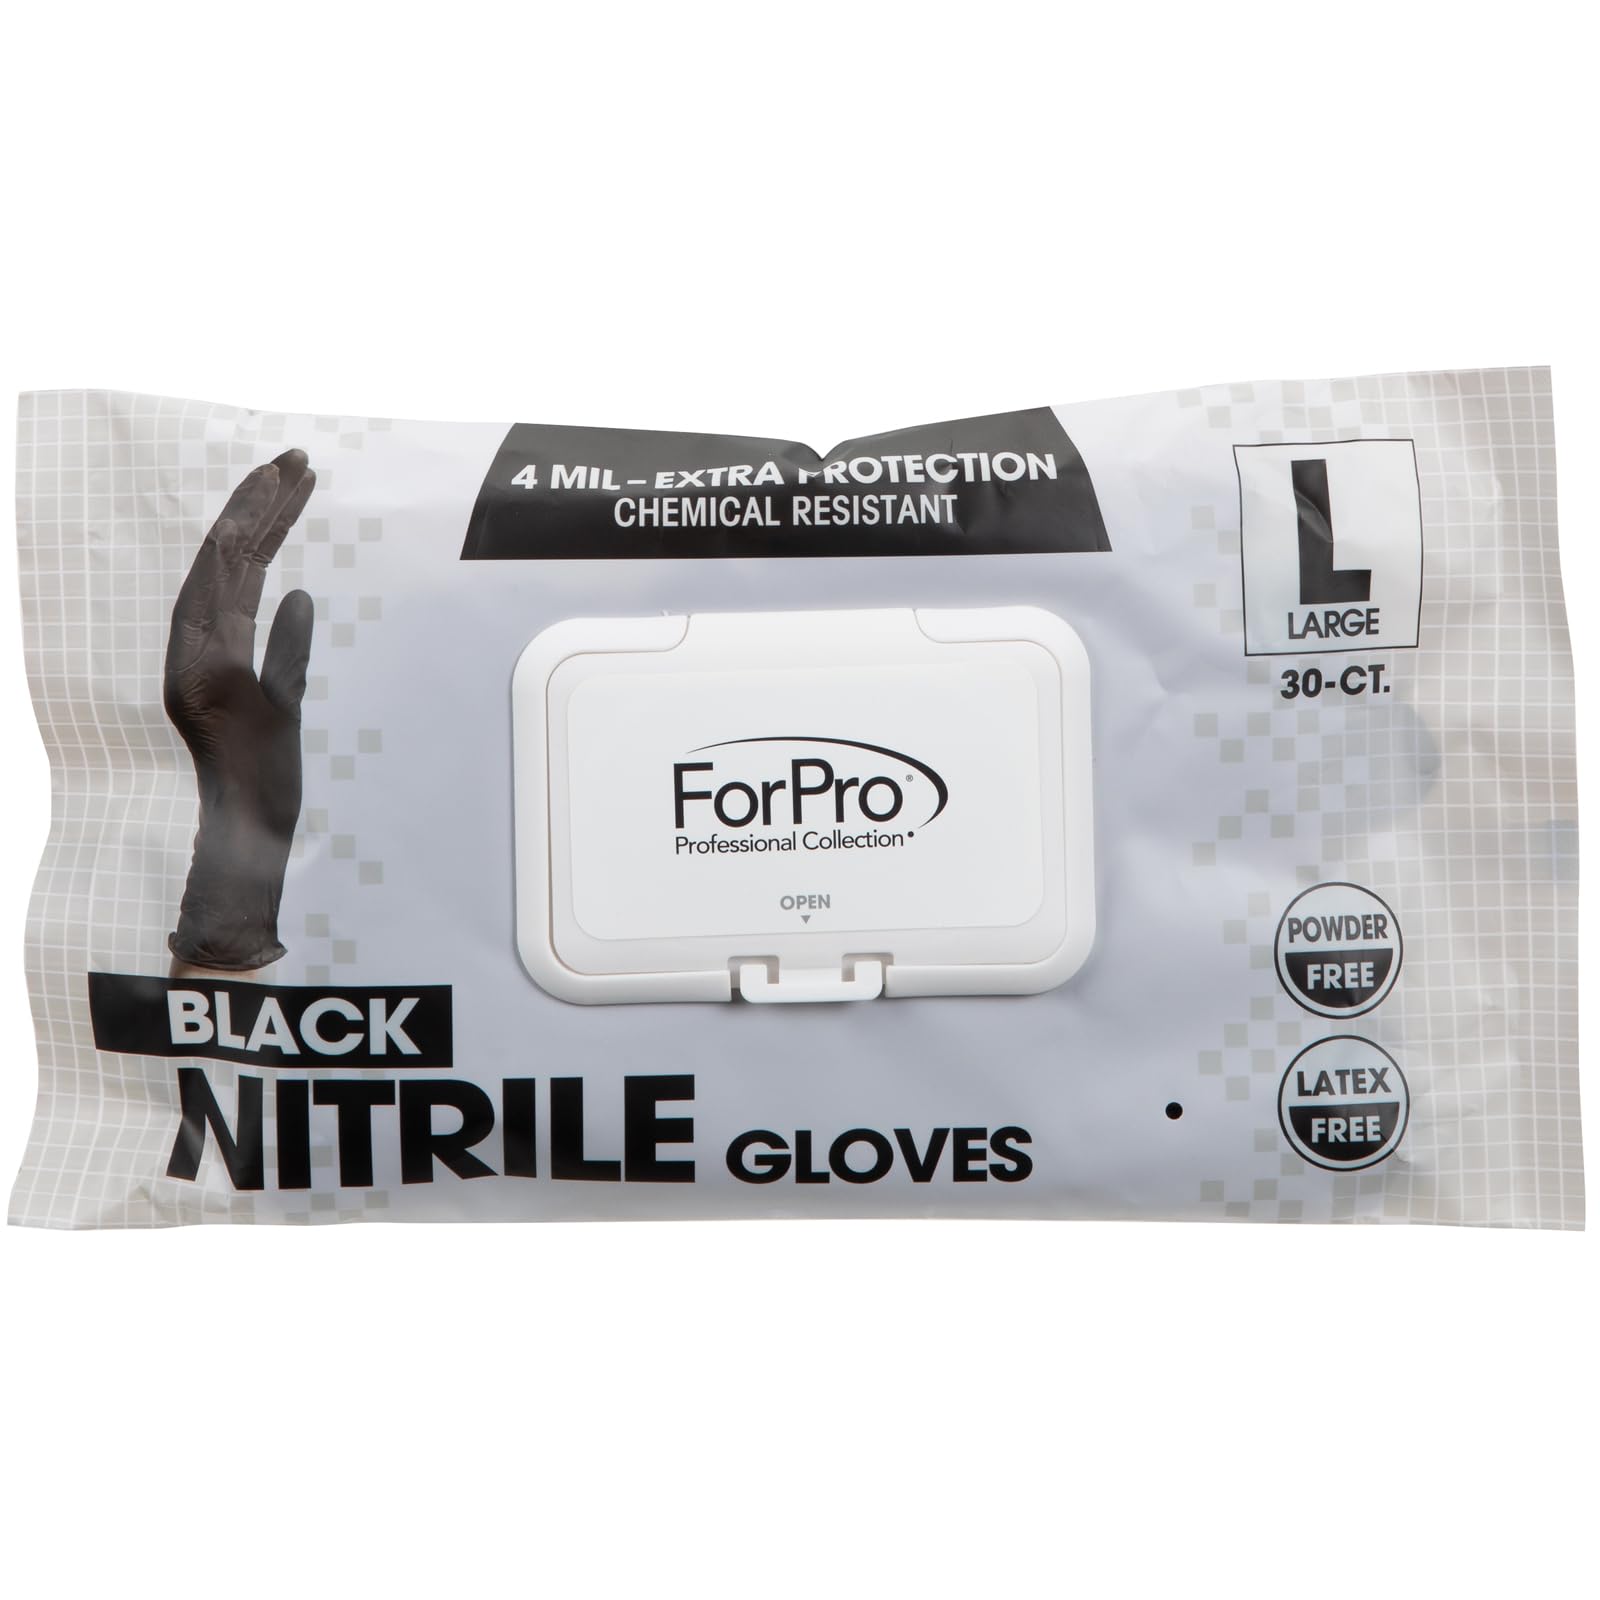 ForPro Disposable Nitrile Gloves, Chemical Resistant, Powder-Free, Latex-Free, Non-Sterile, Food Safe, 4 Mil, Black, Large, 30-Count